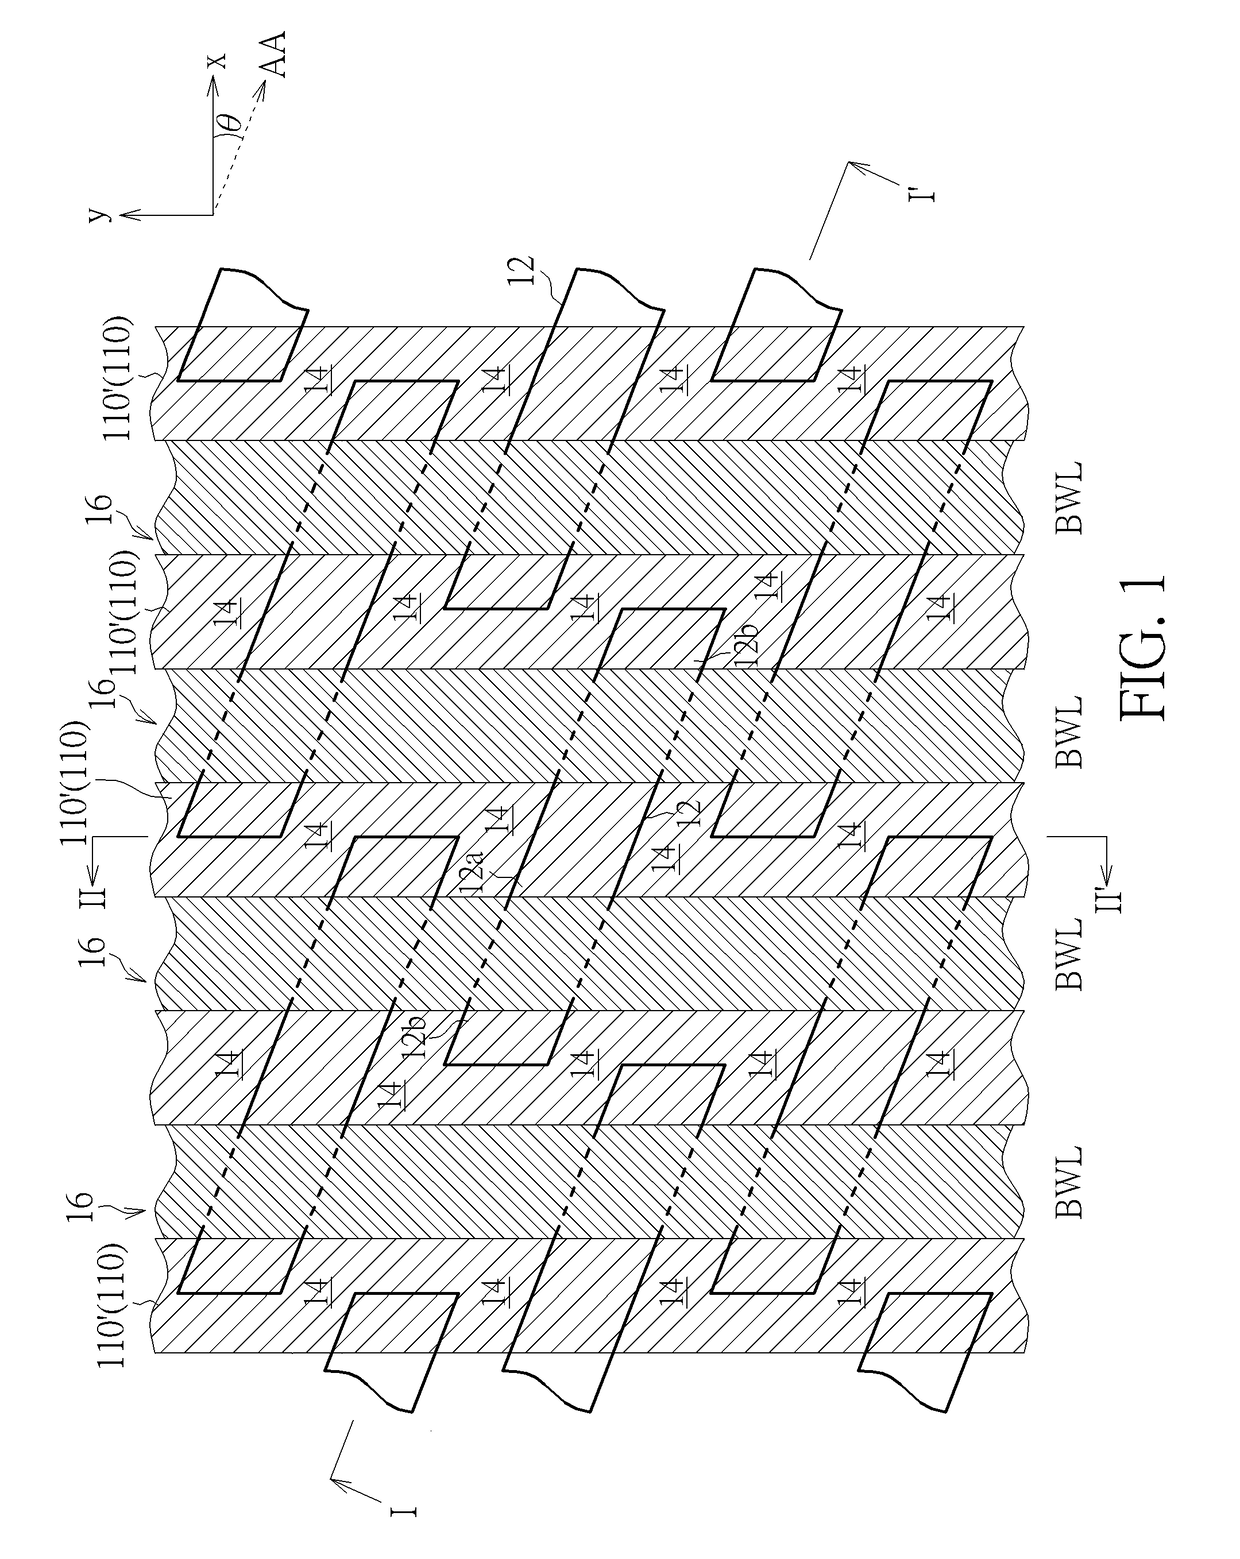 Semiconductor memory device having coplanar digit line contacts and storage node contacts in memory array and method for fabricating the same